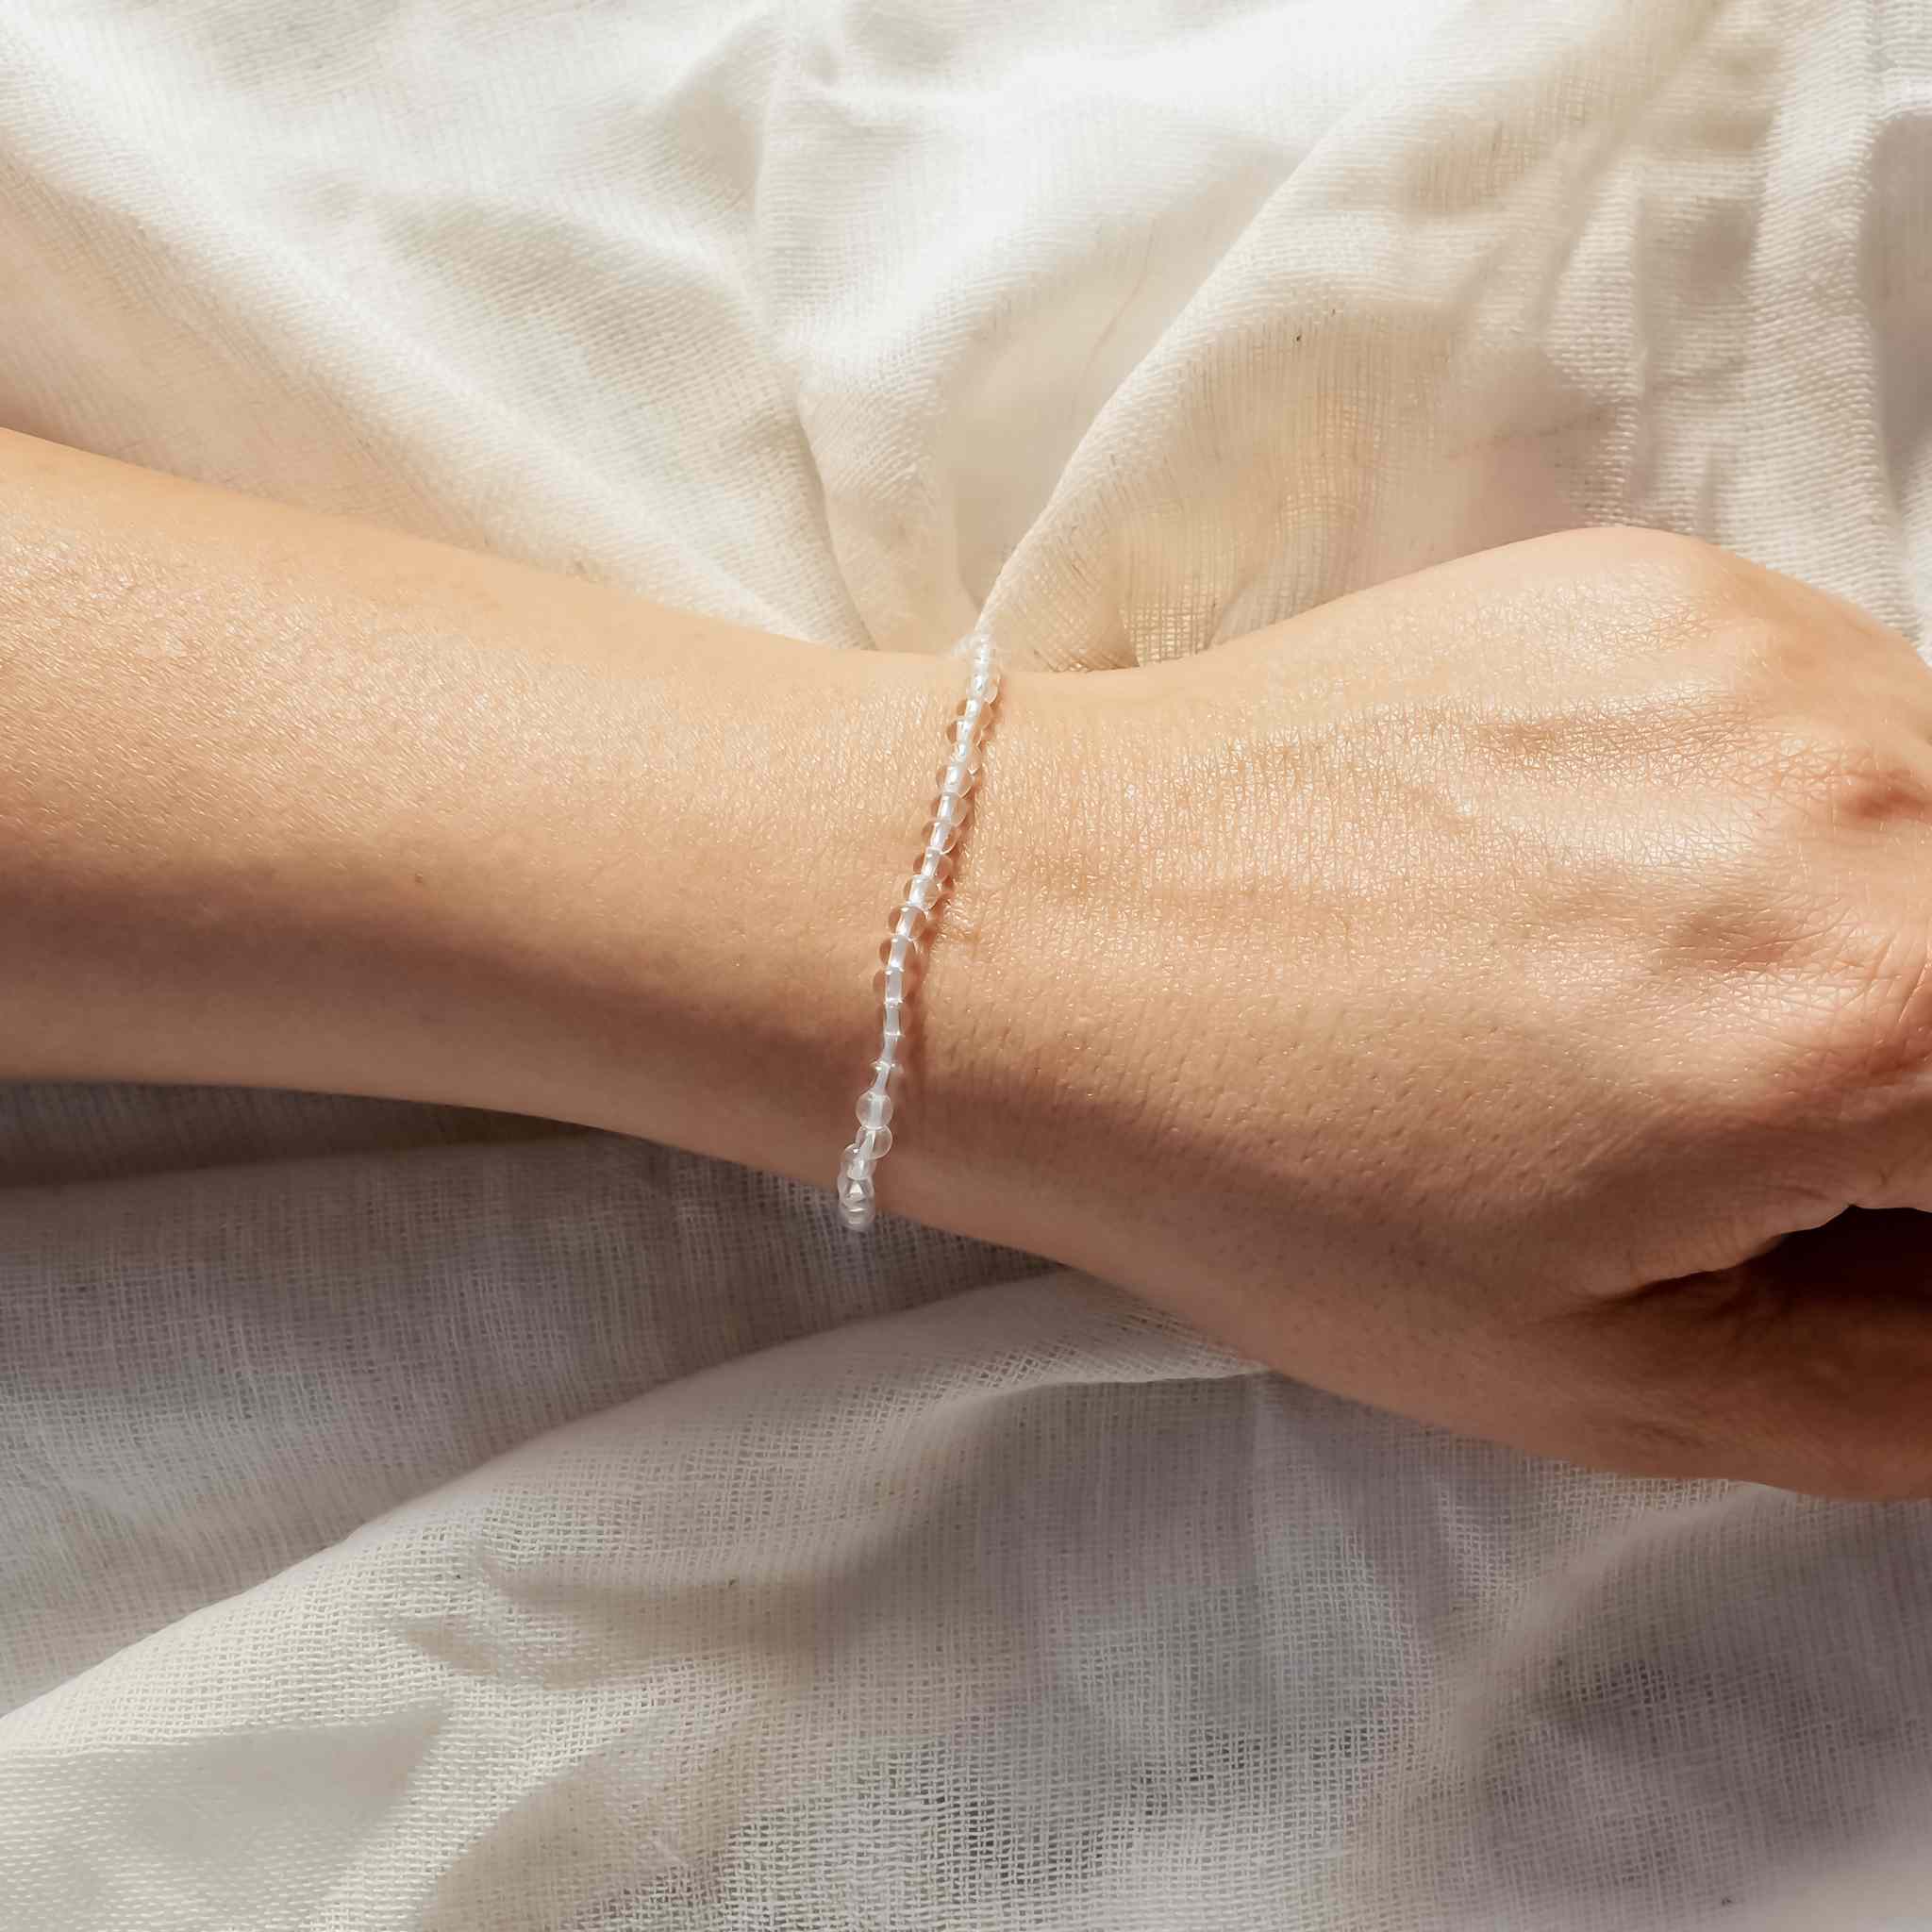 Handmade Triple Clear Quartz Crystal Cuff Crystal Bangles Bracelets For  Women Natural White Druzy Rock Stones Statement Jewelry From Emhuiling,  $205.62 | DHgate.Com